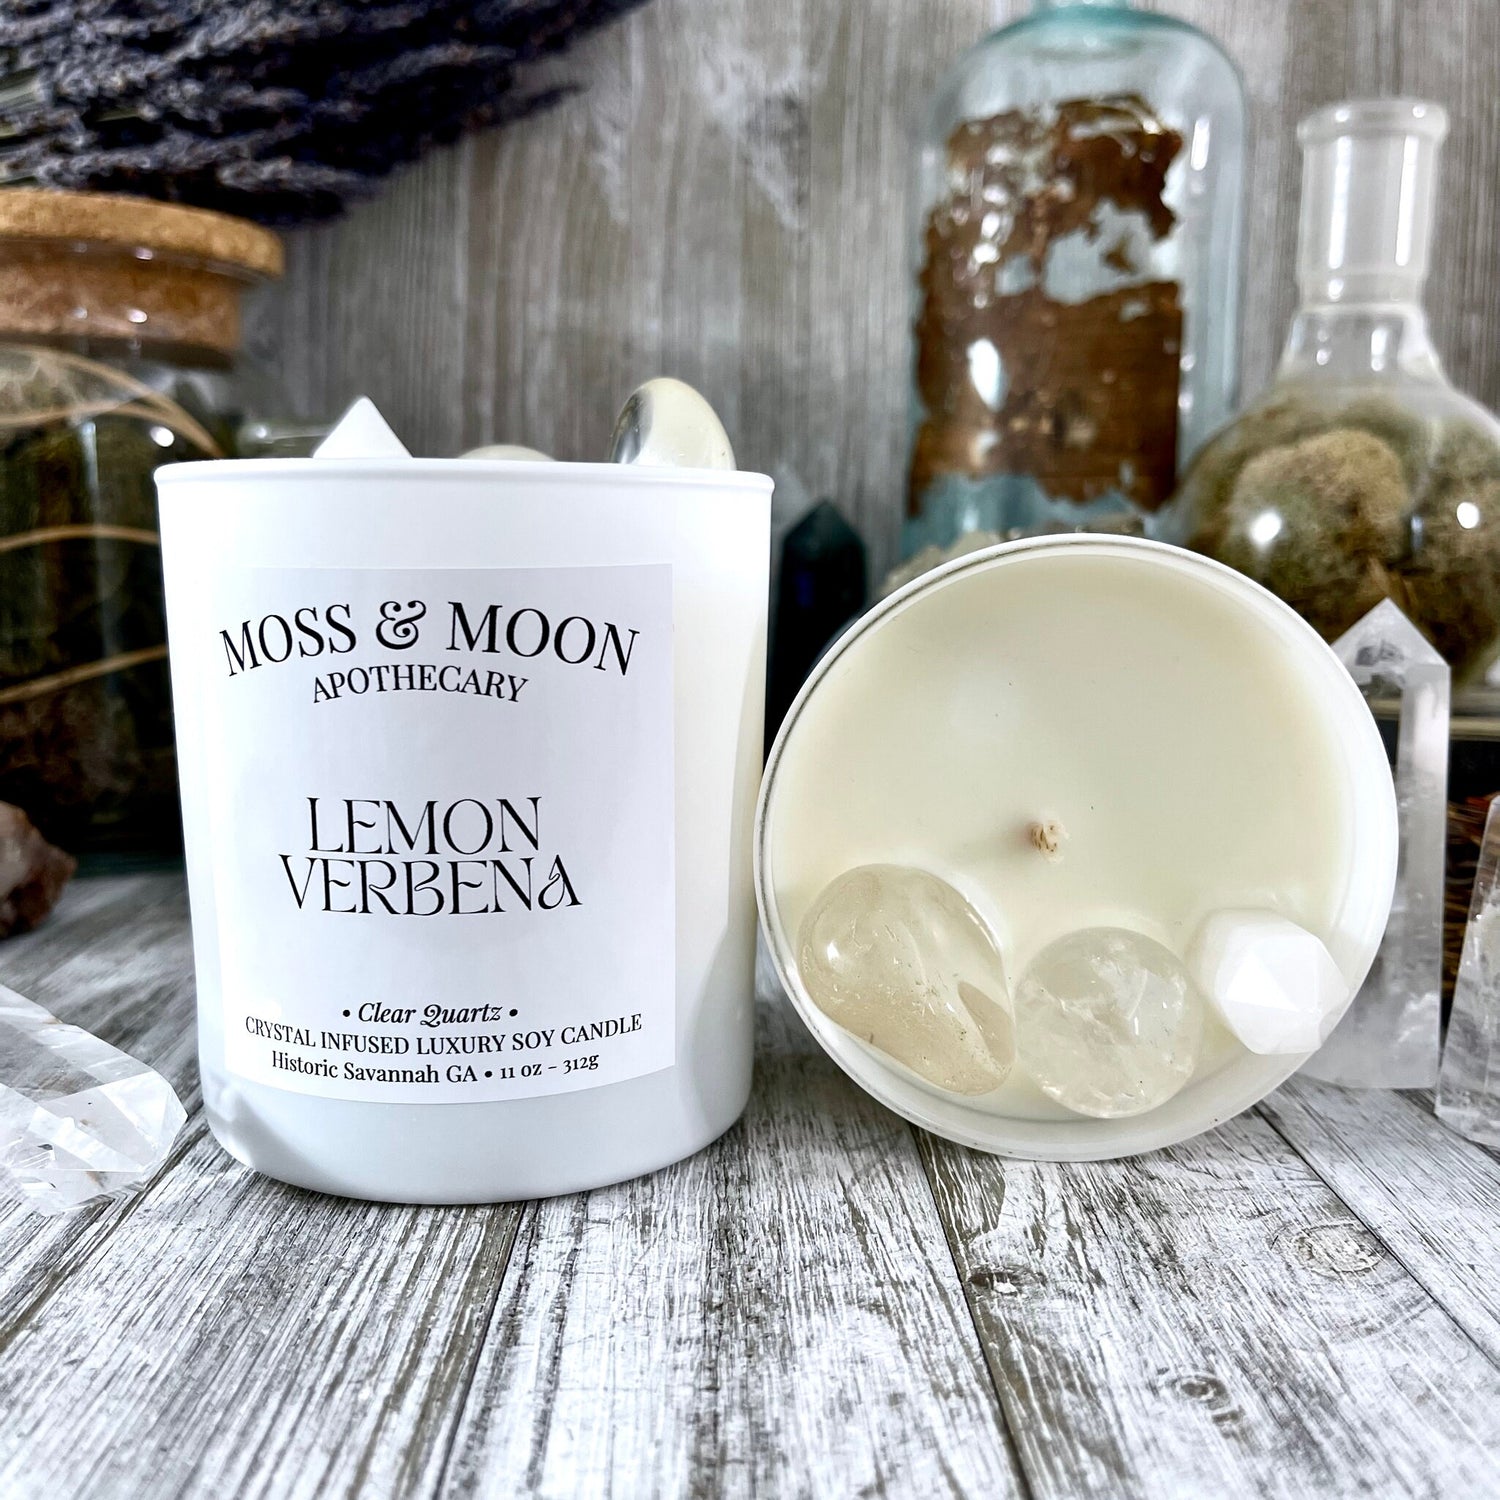 Lemon Verbena Candle with Clear Quartz - Moss & Moon Apothecary Crystal Infused Luxury Soy Candle